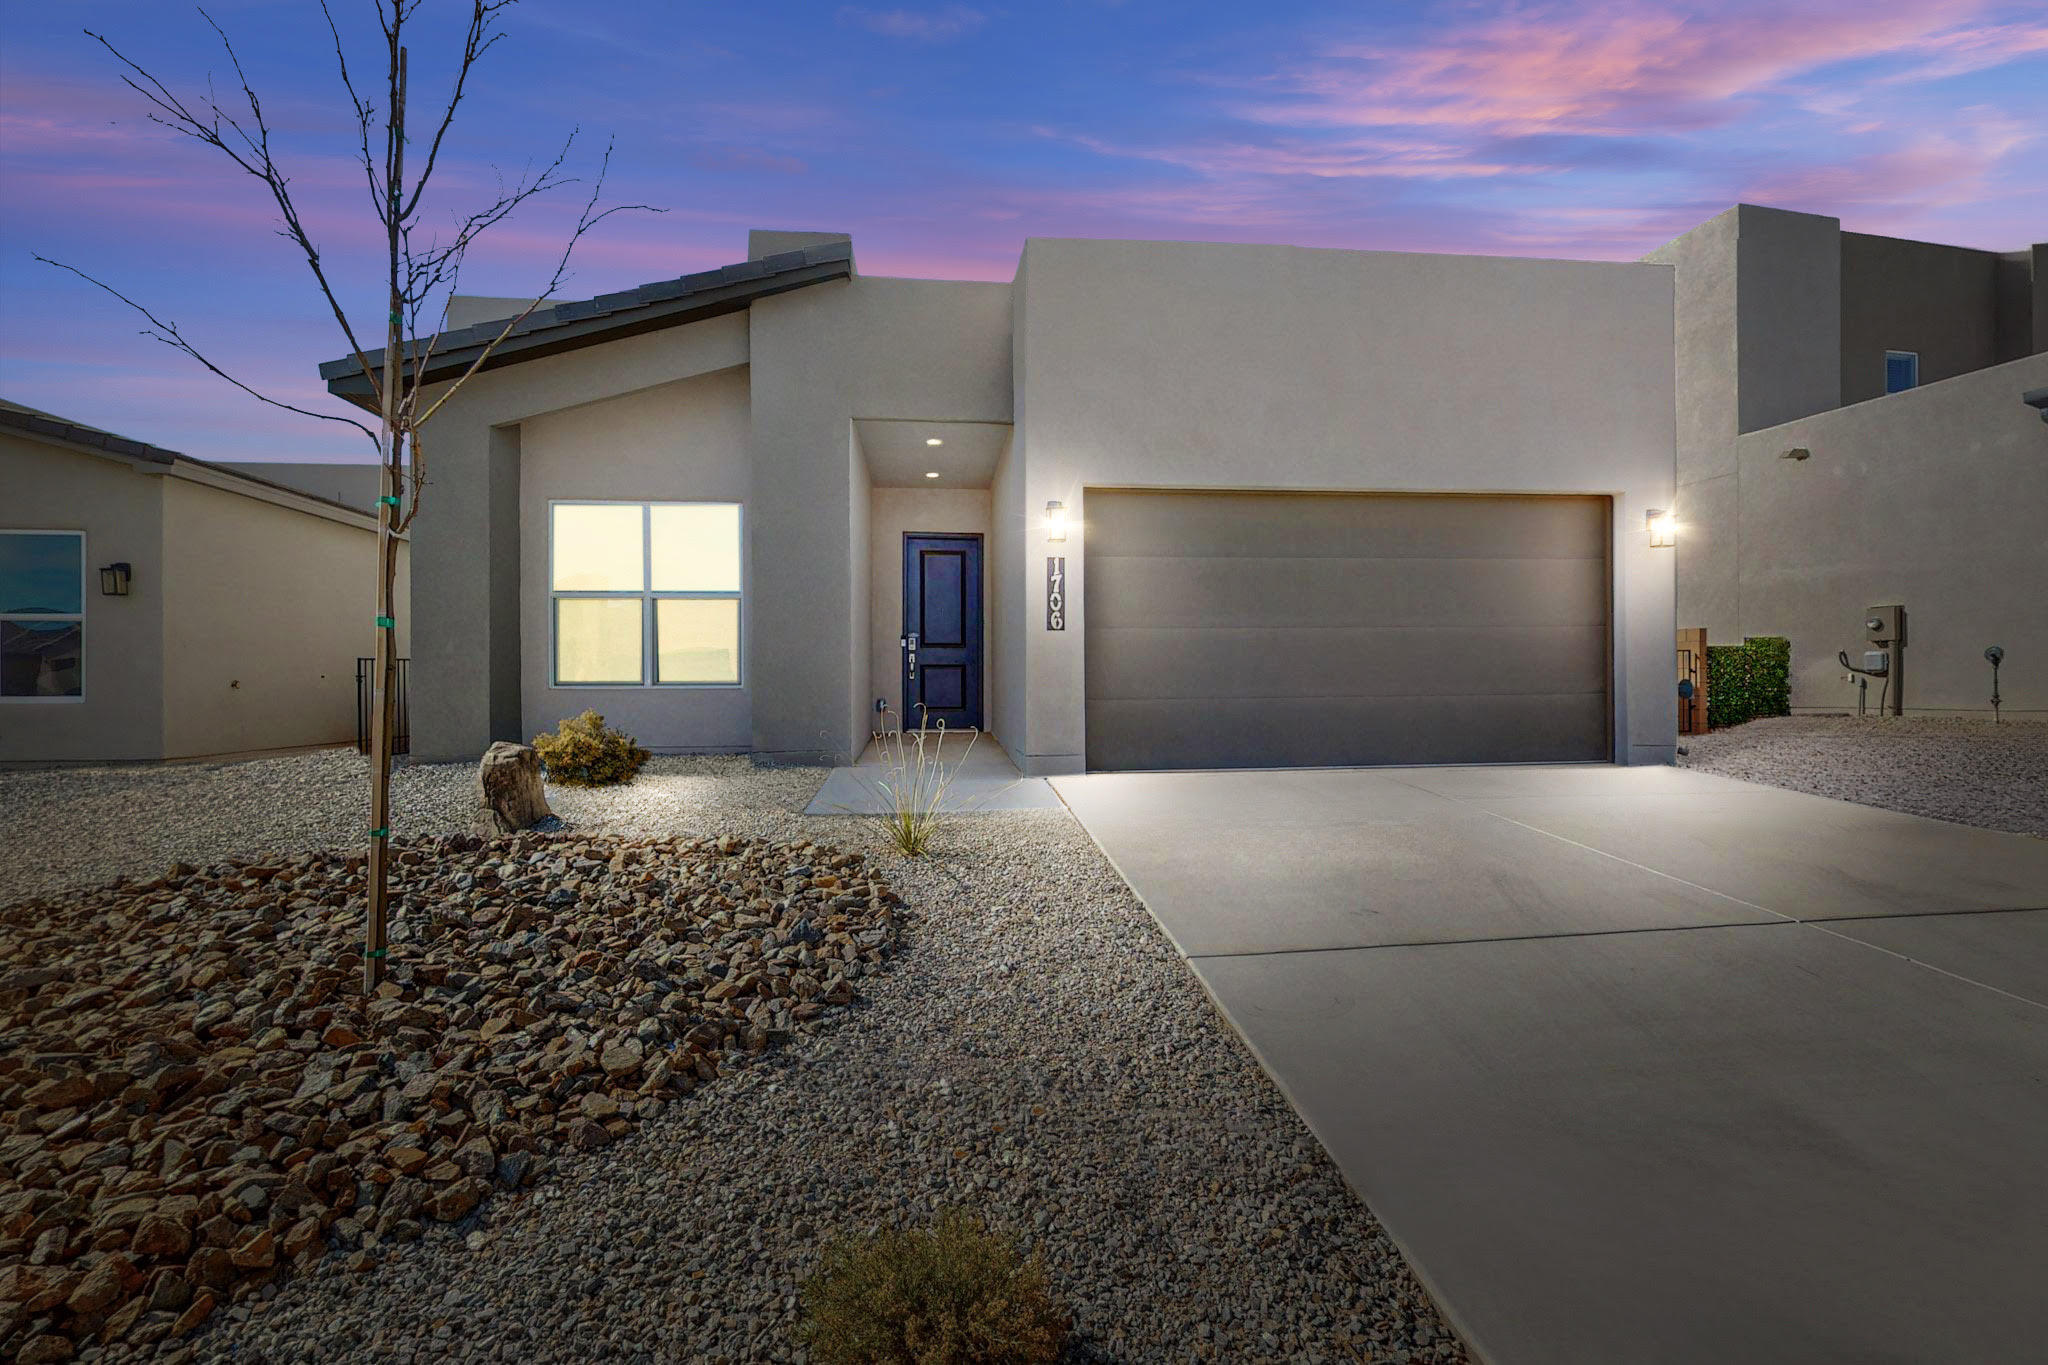 Welcome to this beautiful MODERN ONE-OWNER ranch home in Tesoro at Fiesta! Built in 2022, in pristine form, with over 1700 SF, 3 beds, and 1.75 baths, this gem boasts irresistible charm! A fully xeriscaped front yard offers stunning curb appeal, while inside, discover an inviting open floor plan with top-notch finishes. The kitchen is perfect for a chef with granite countertops, an island, and a convenient beverage bar. Enjoy meals in the formal dining area or relax in the spacious great room with a cozy fireplace. The owner's suite offers luxury and privacy with a walk-in closet. Step outside to a covered patio and a low-maintenance gravel backyard, perfect for entertaining. Near amenities, park, and easy access to I25. Don't miss this one!